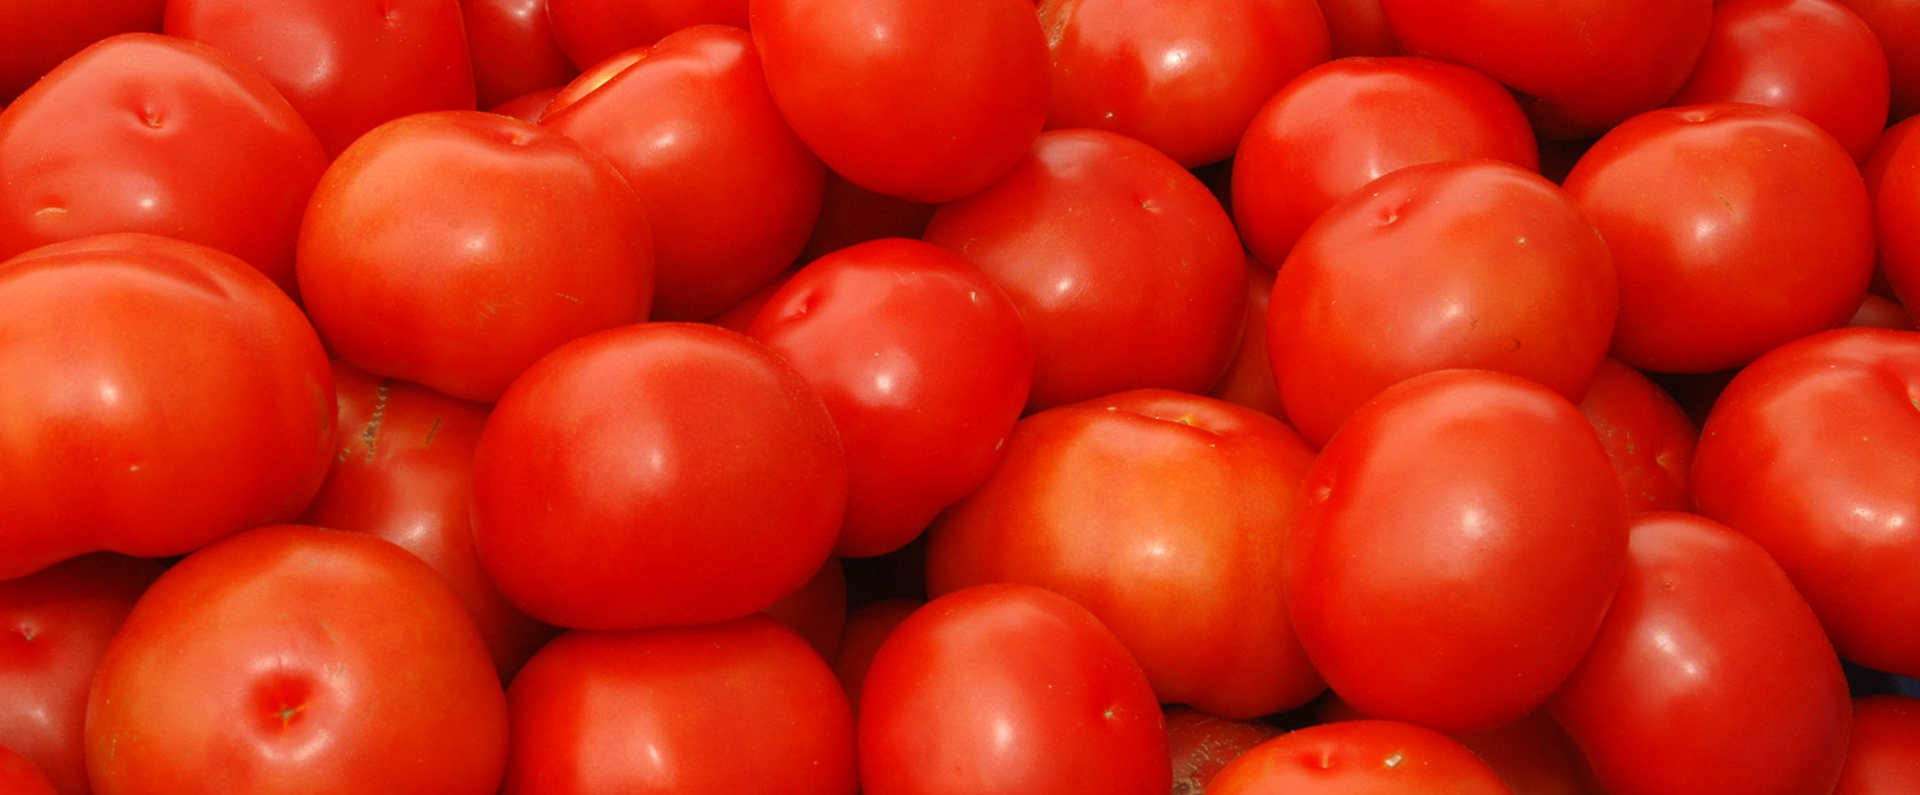 A bunch of fresh red tomatoes